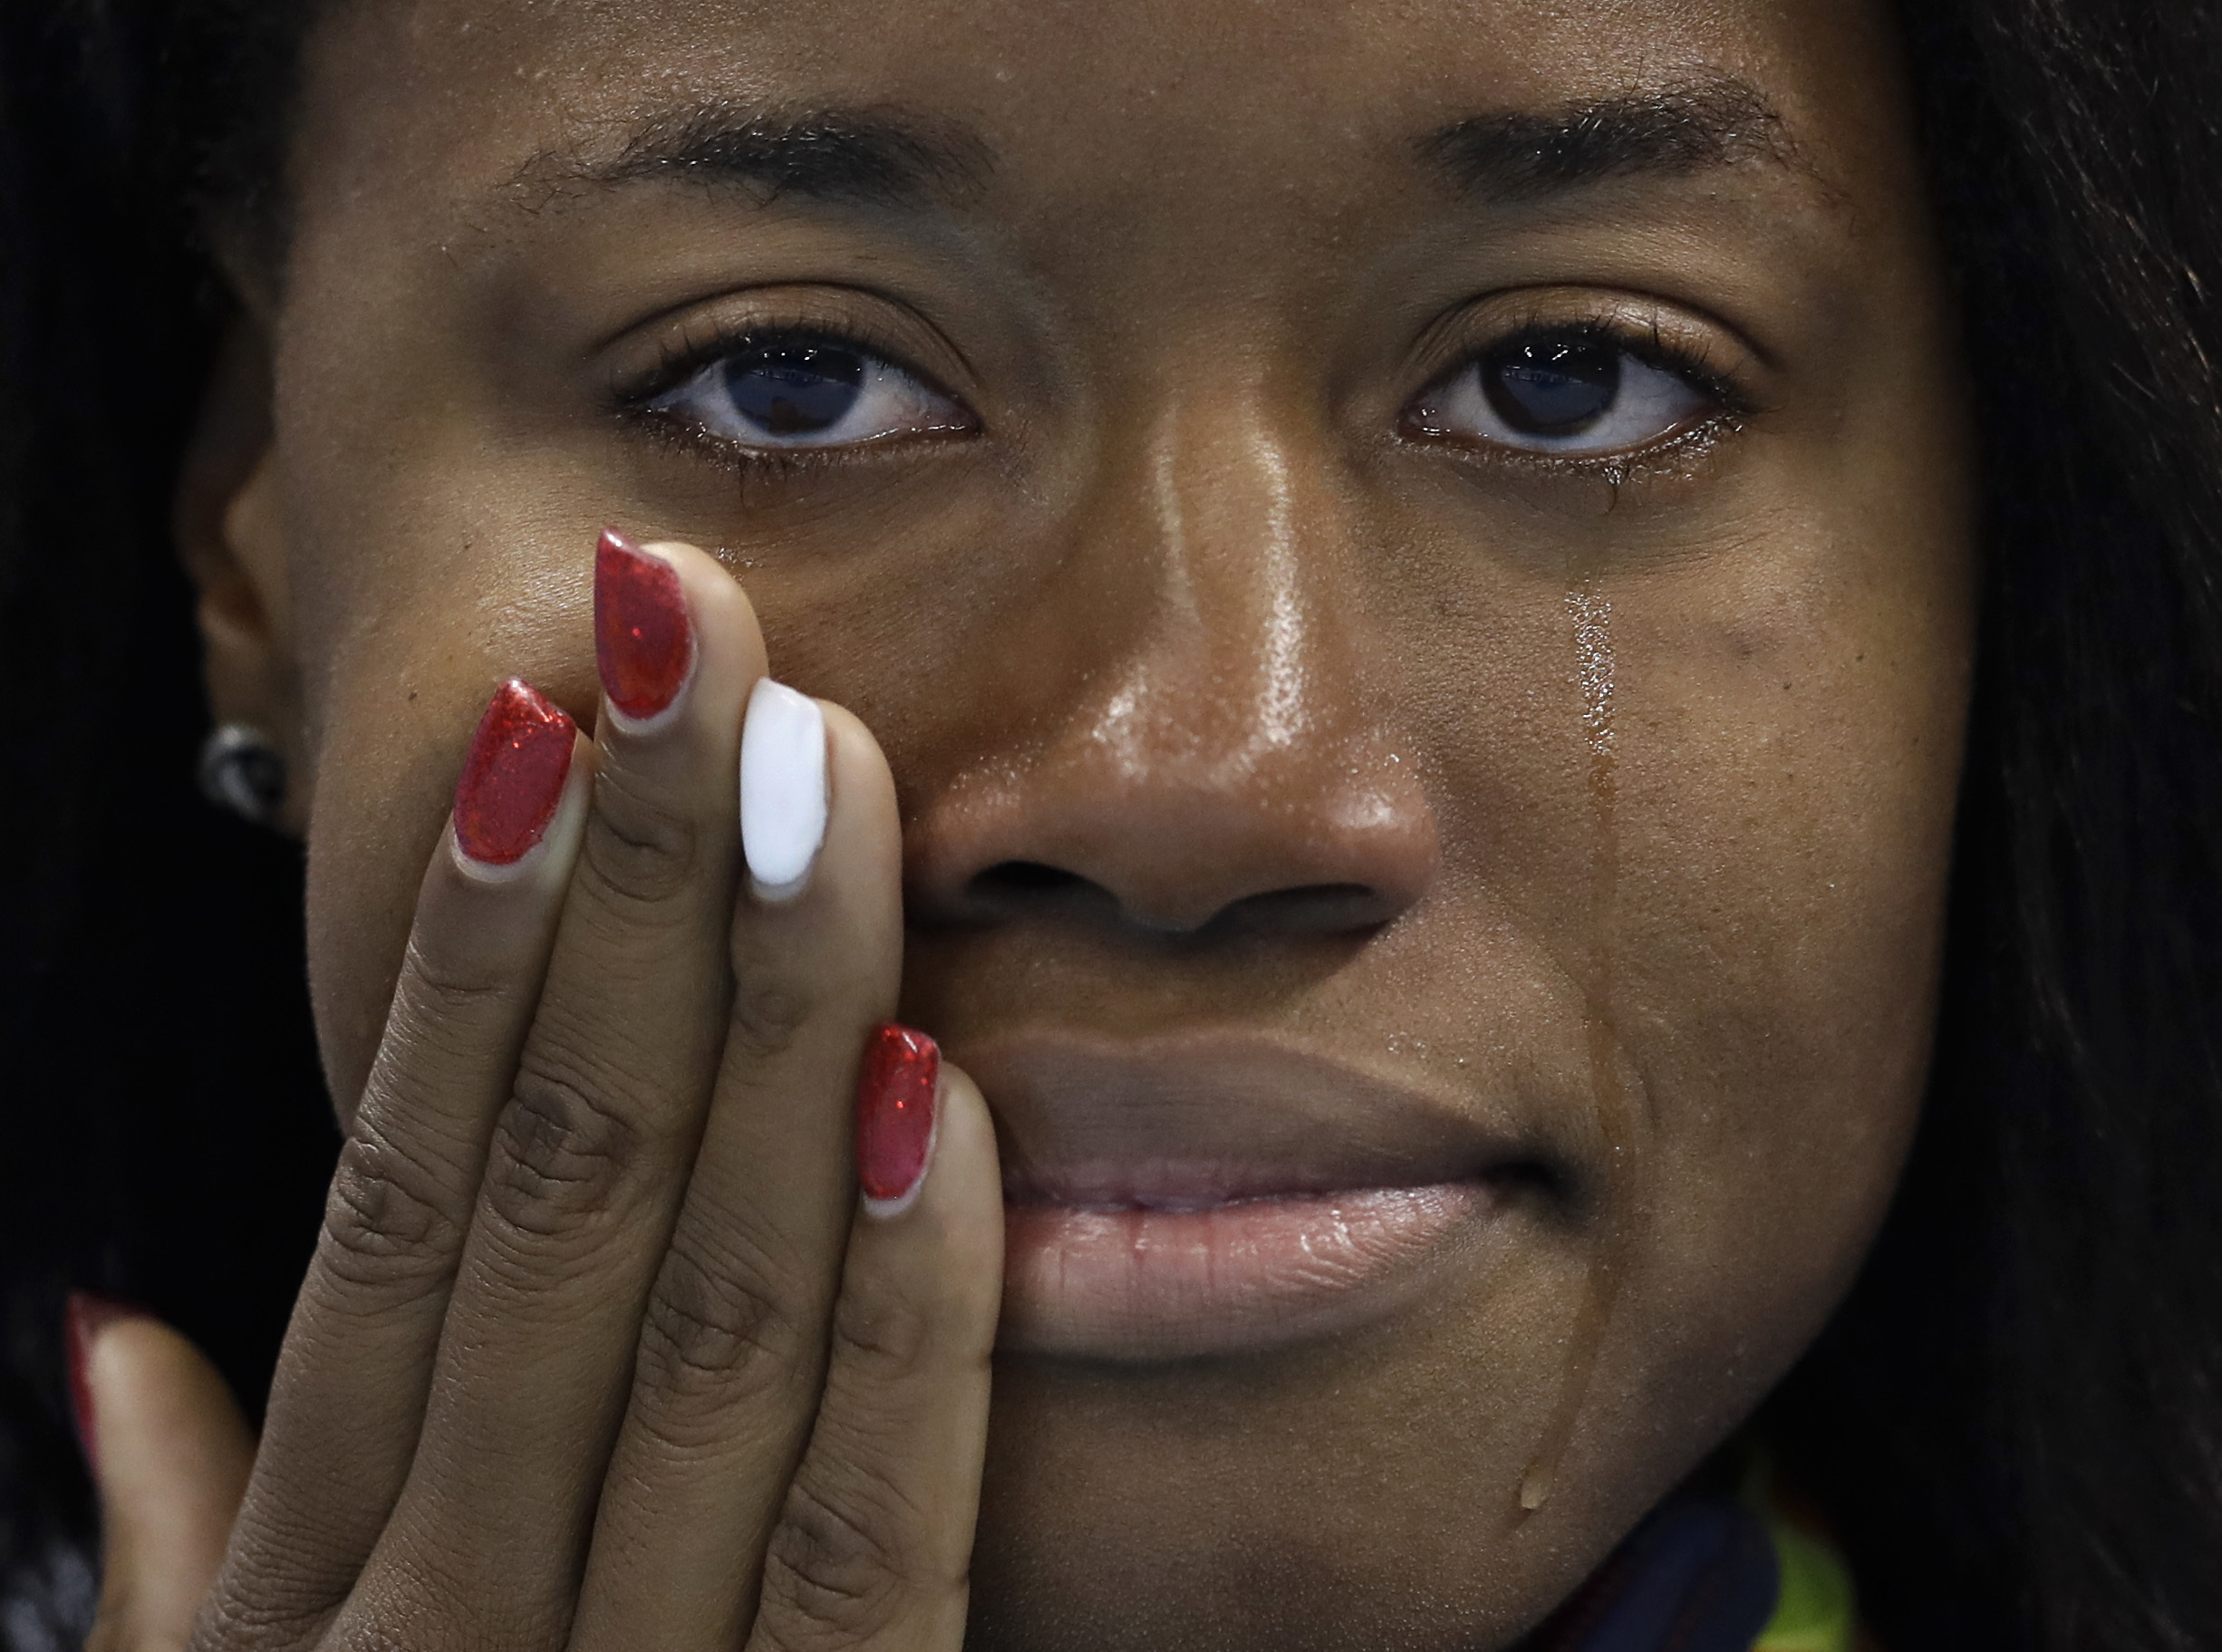 United States' gold medal winner Simone Manuel cries during the medal ceremony for the women's 100-meter freestyle final during the swimming competitions at the 2016 Summer Olympics, Friday, Aug. 12, 2016, in Rio de Janeiro, Brazil. (AP Photo/Michael Sohn)